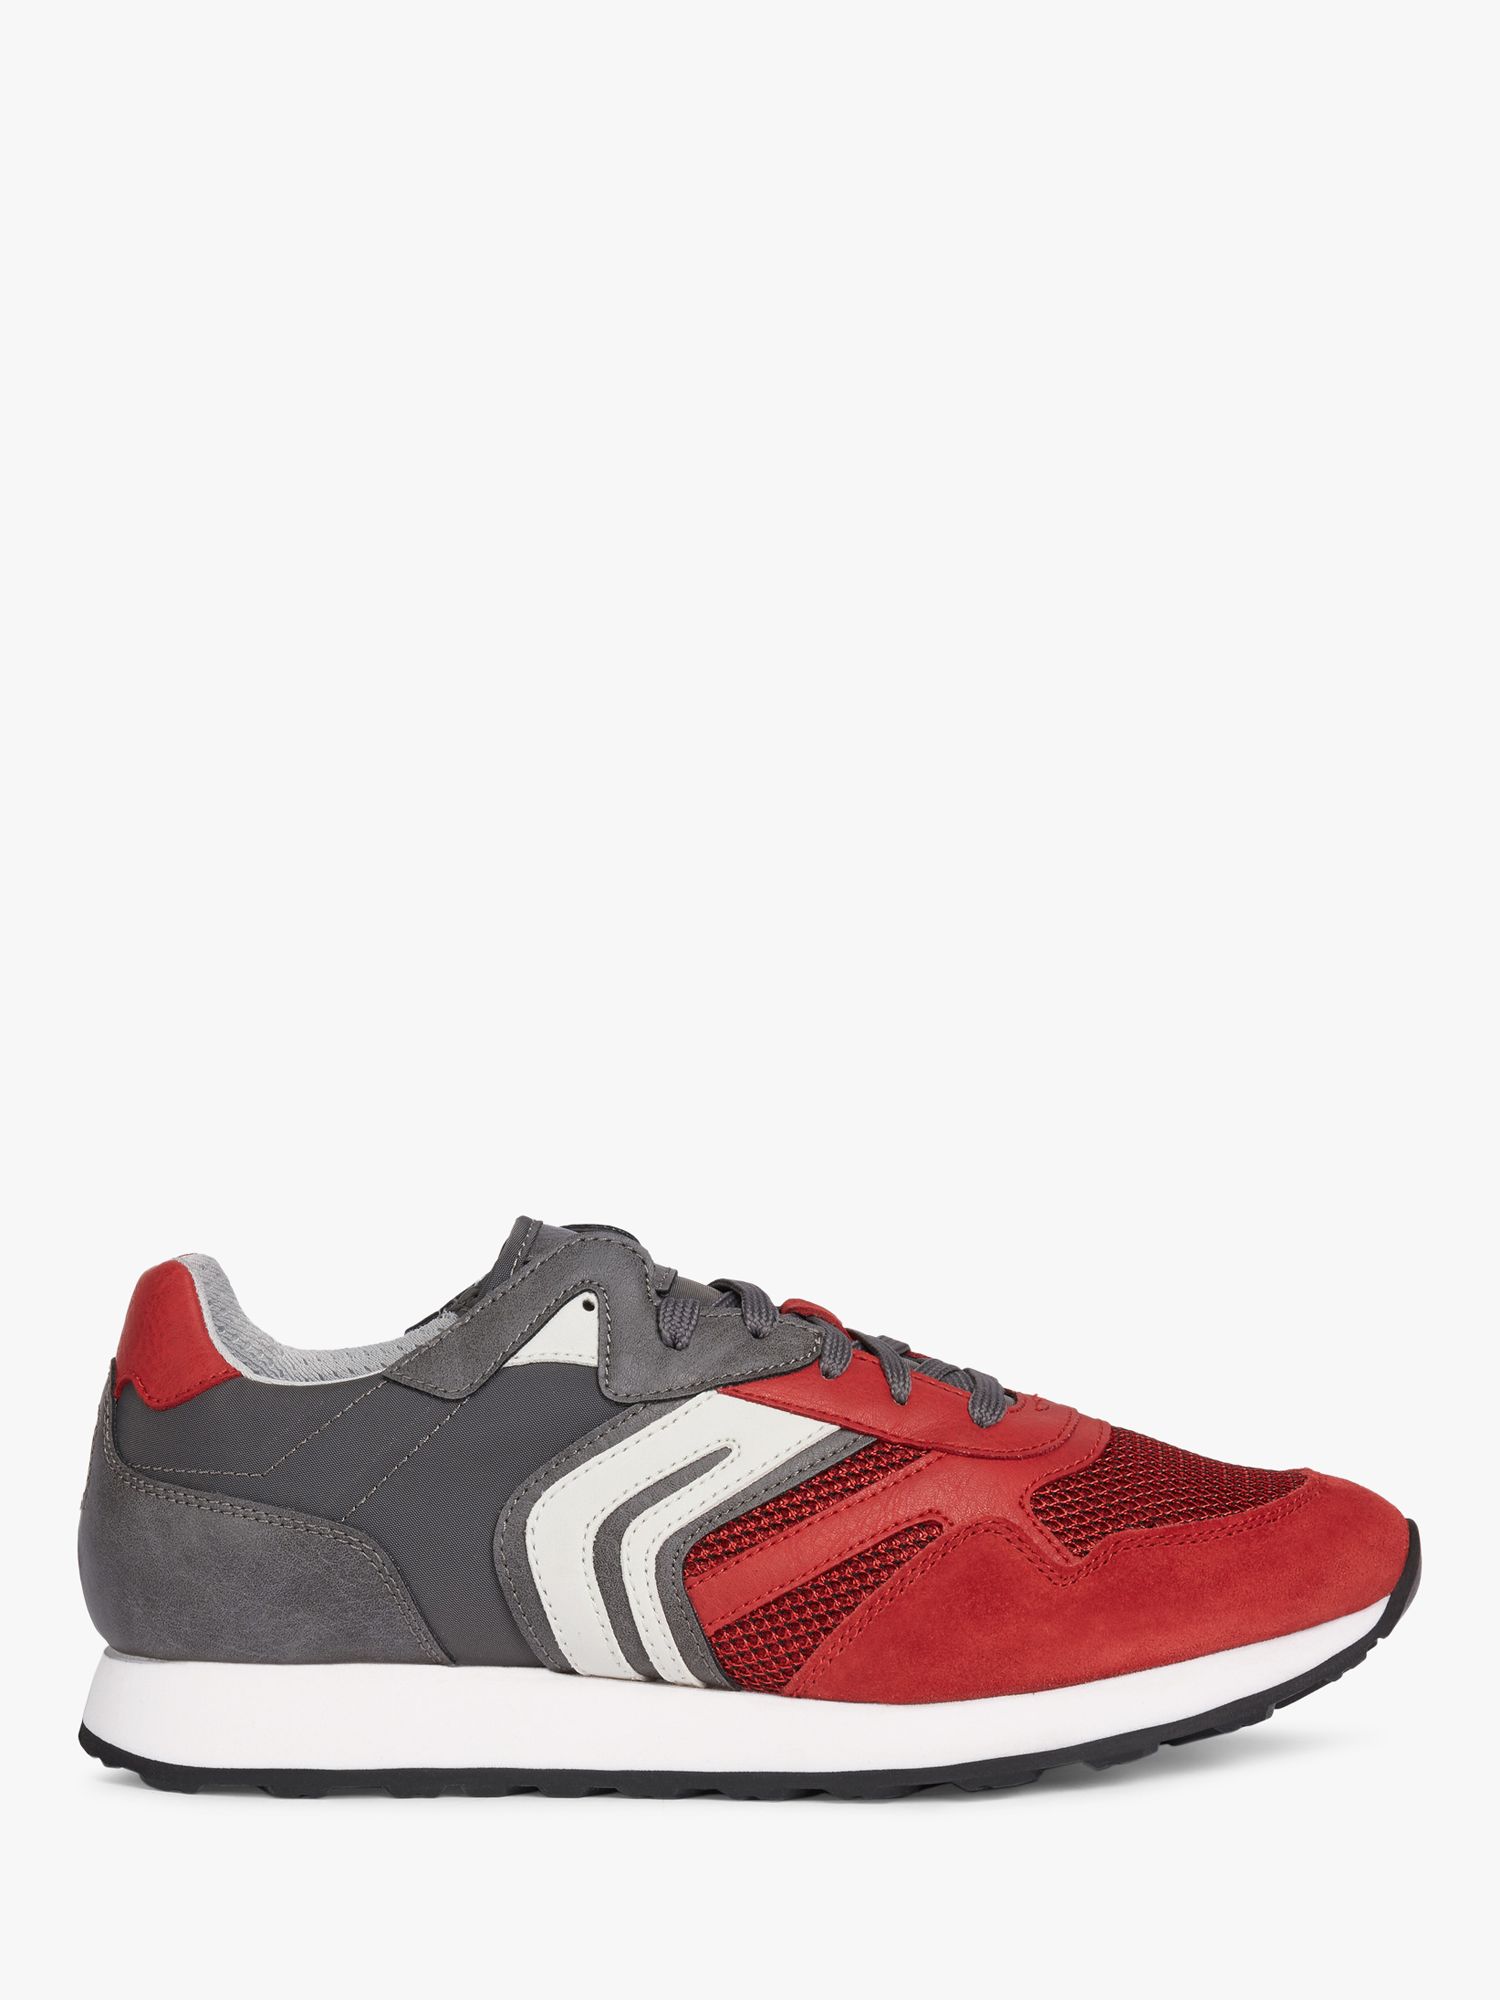 Geox Vincit Trainers, Red/Grey at John Lewis & Partners